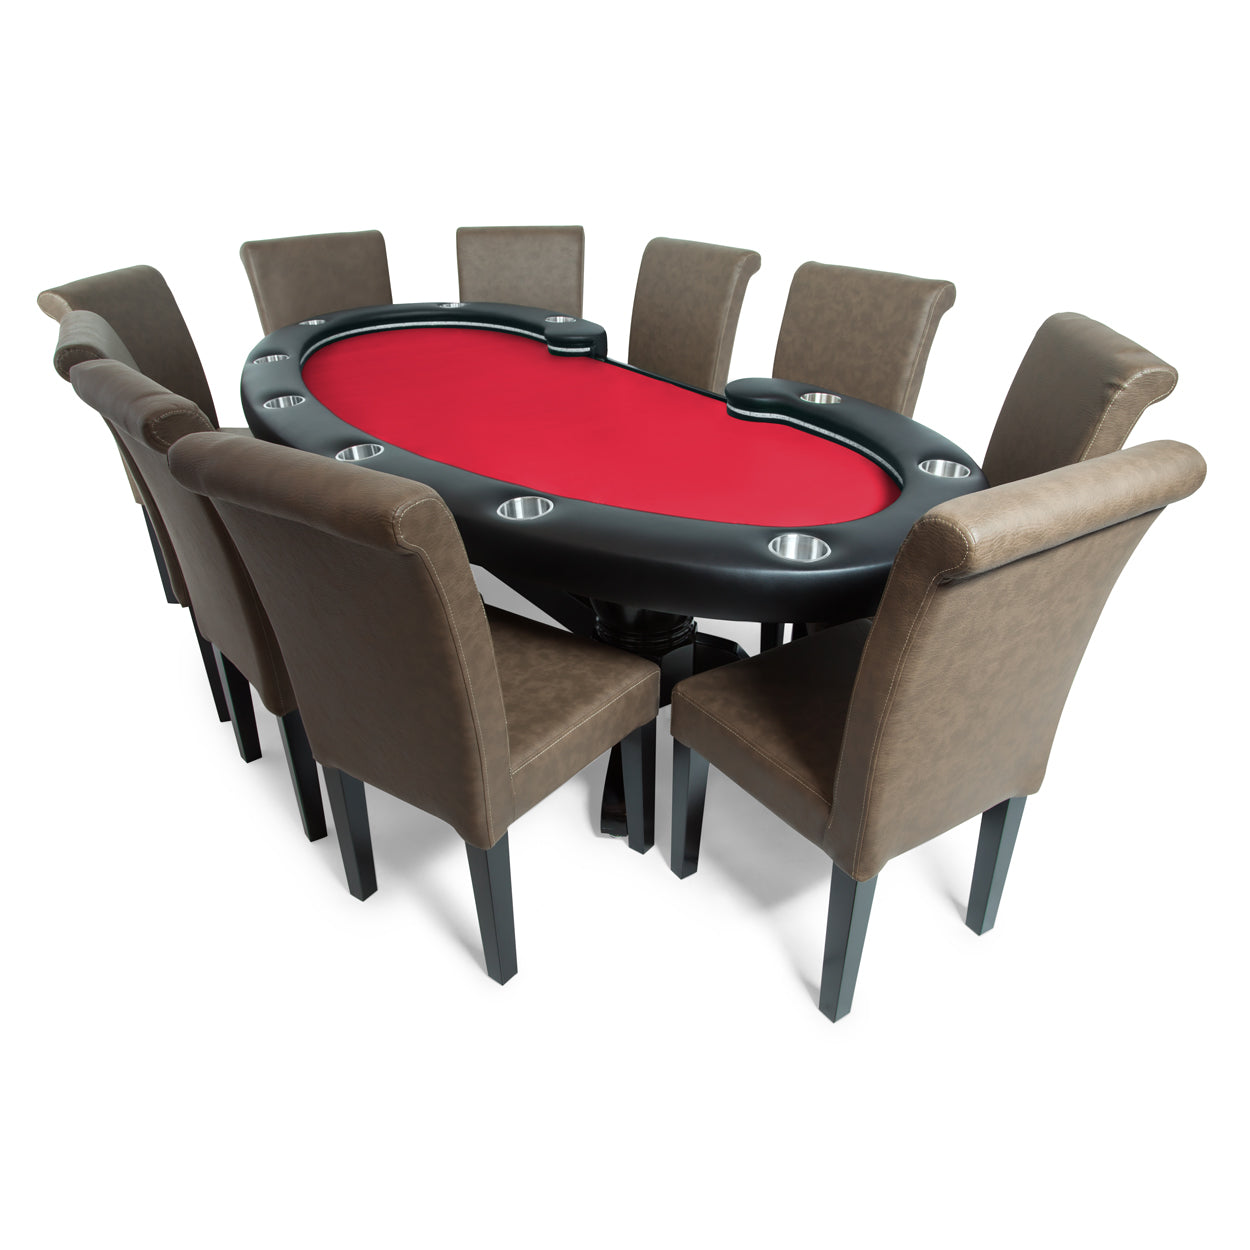 BBO The Lumen HD Poker Table Red Velveteen With Premium Lounge Chair